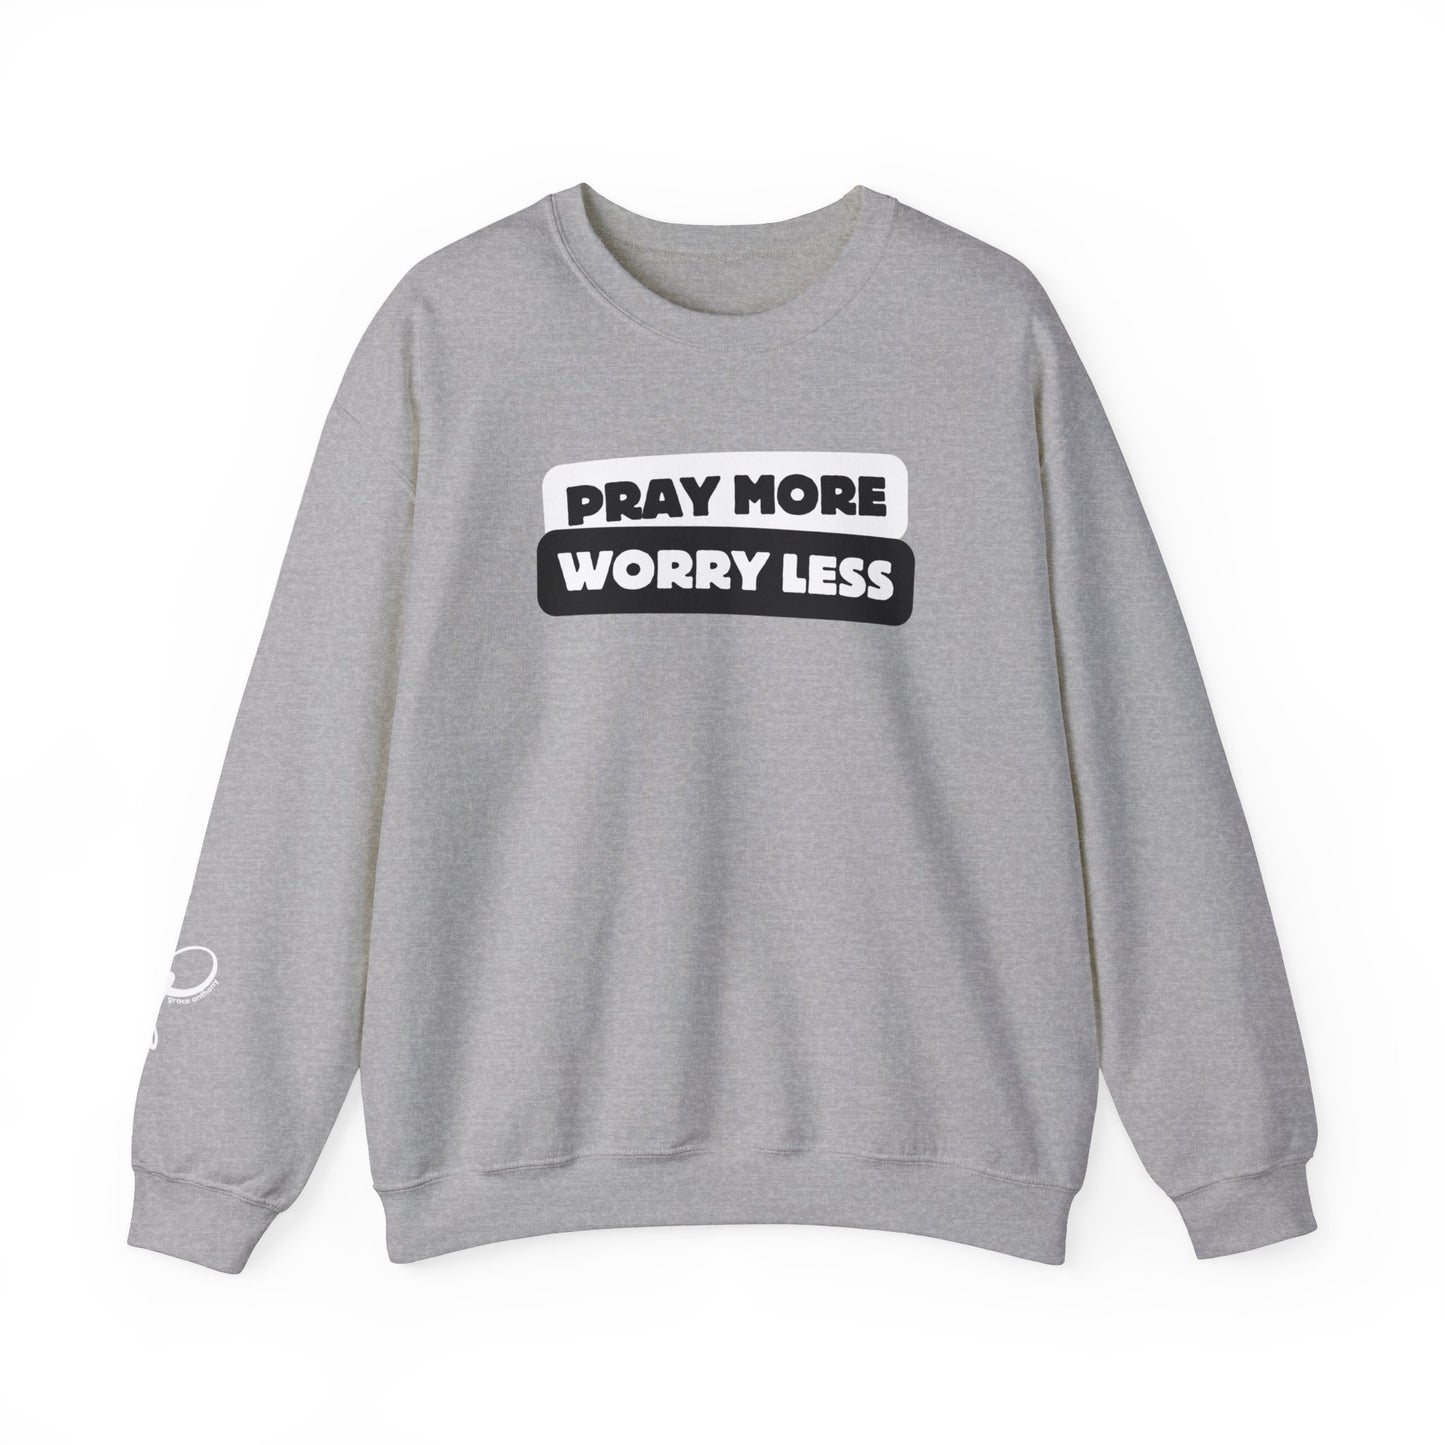 Pray More Worry Less Men Women Sweatshirt Hoodie Christian Bible Quotes Inspiration Motivation Quotes Gift for Her Him Prayer Request